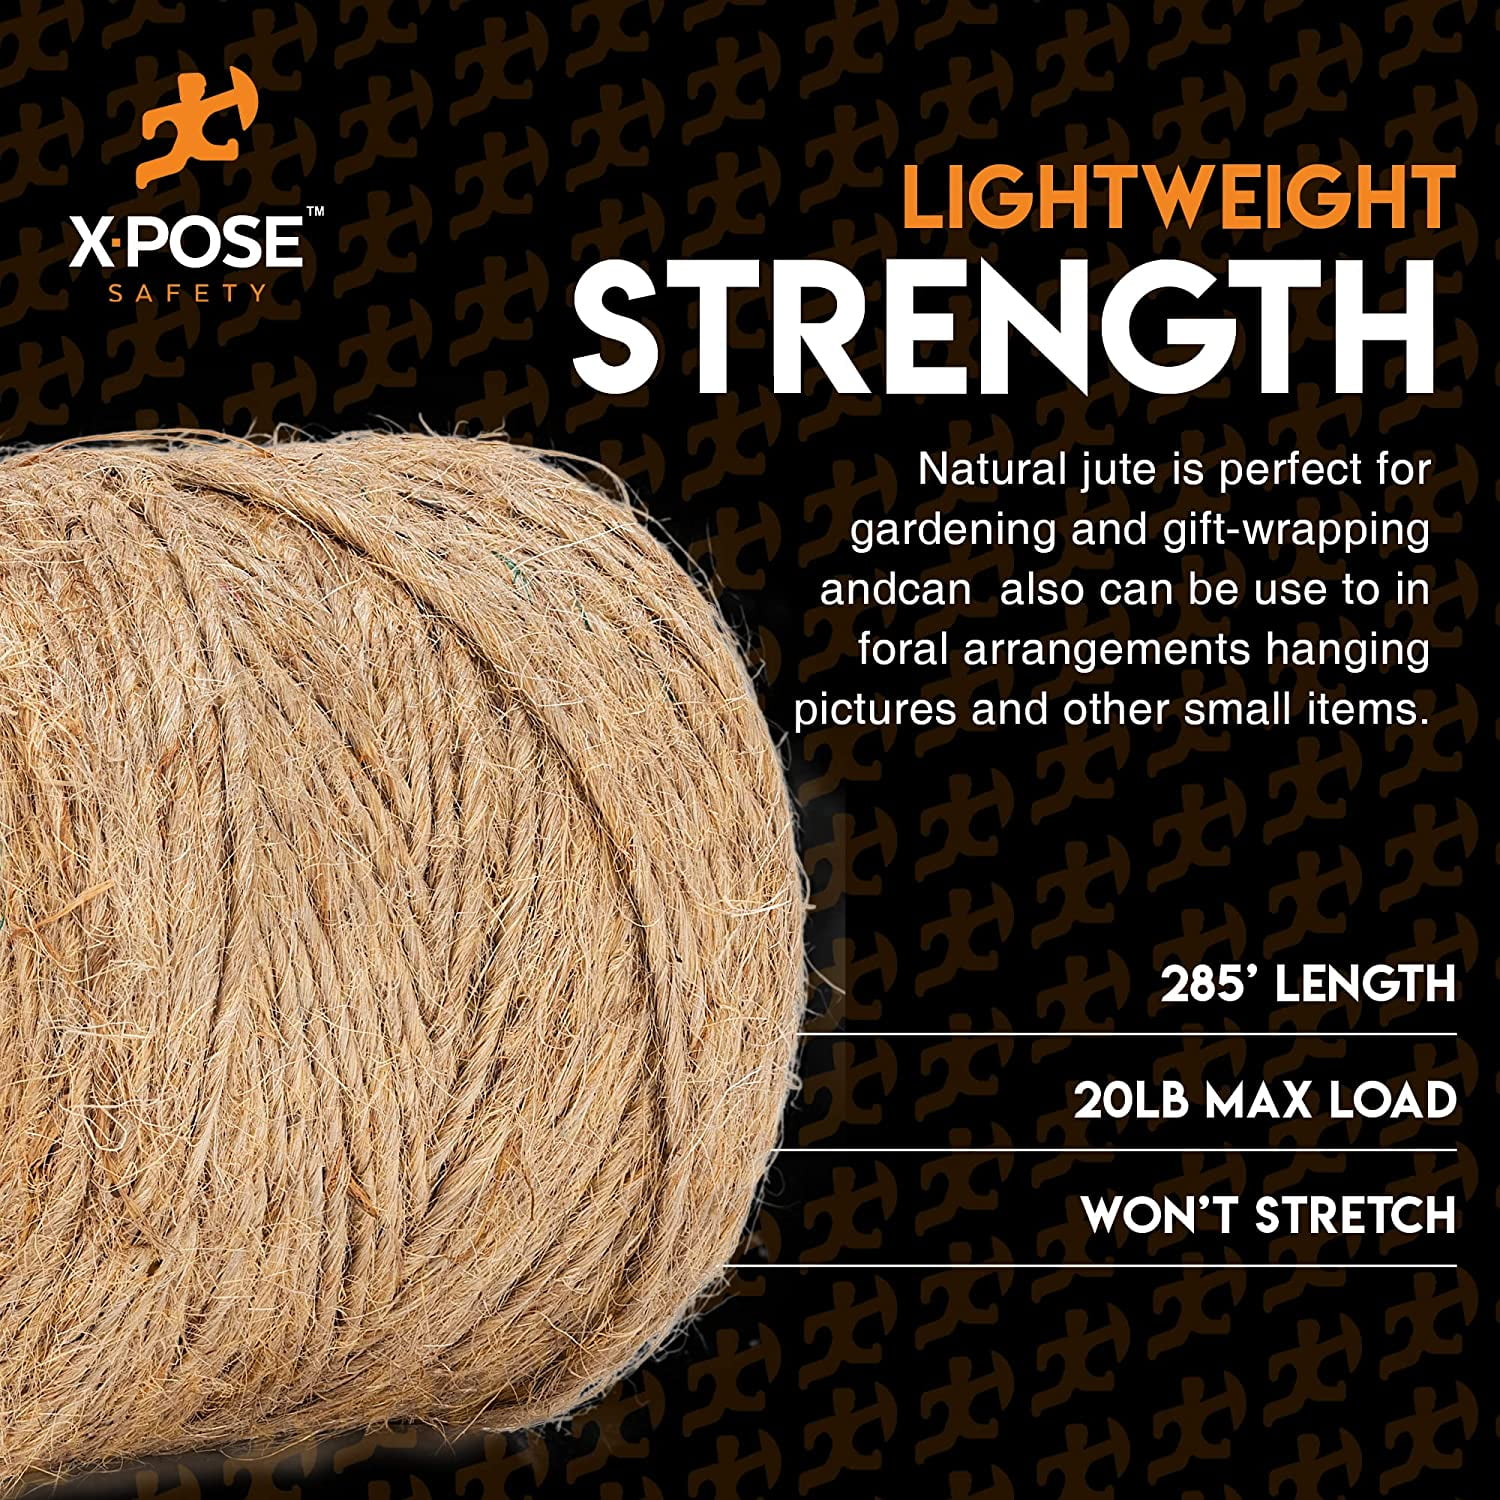 Jute Twine - 2 Ply Brown Roll 338' Jute Twine for Crafts - Soft Yet Strong Natural Jute String, Burlap String, Wrapping, Packing Materials